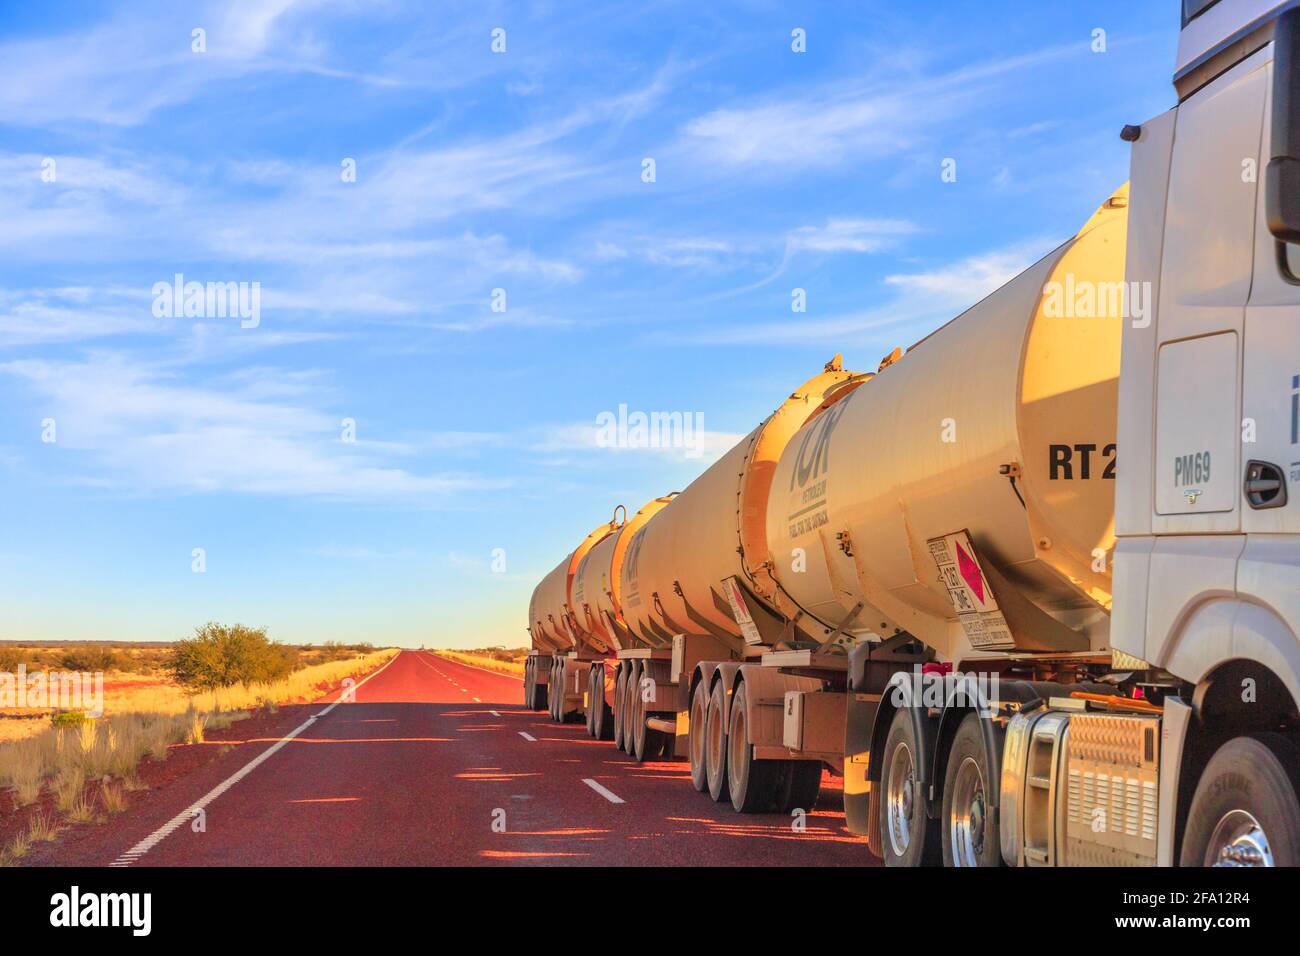 Northern Territory, Australia - August 29, 2019: fuel road-train truck crossing the highways of the Northern Territory of Australian Outback. Stock Photo